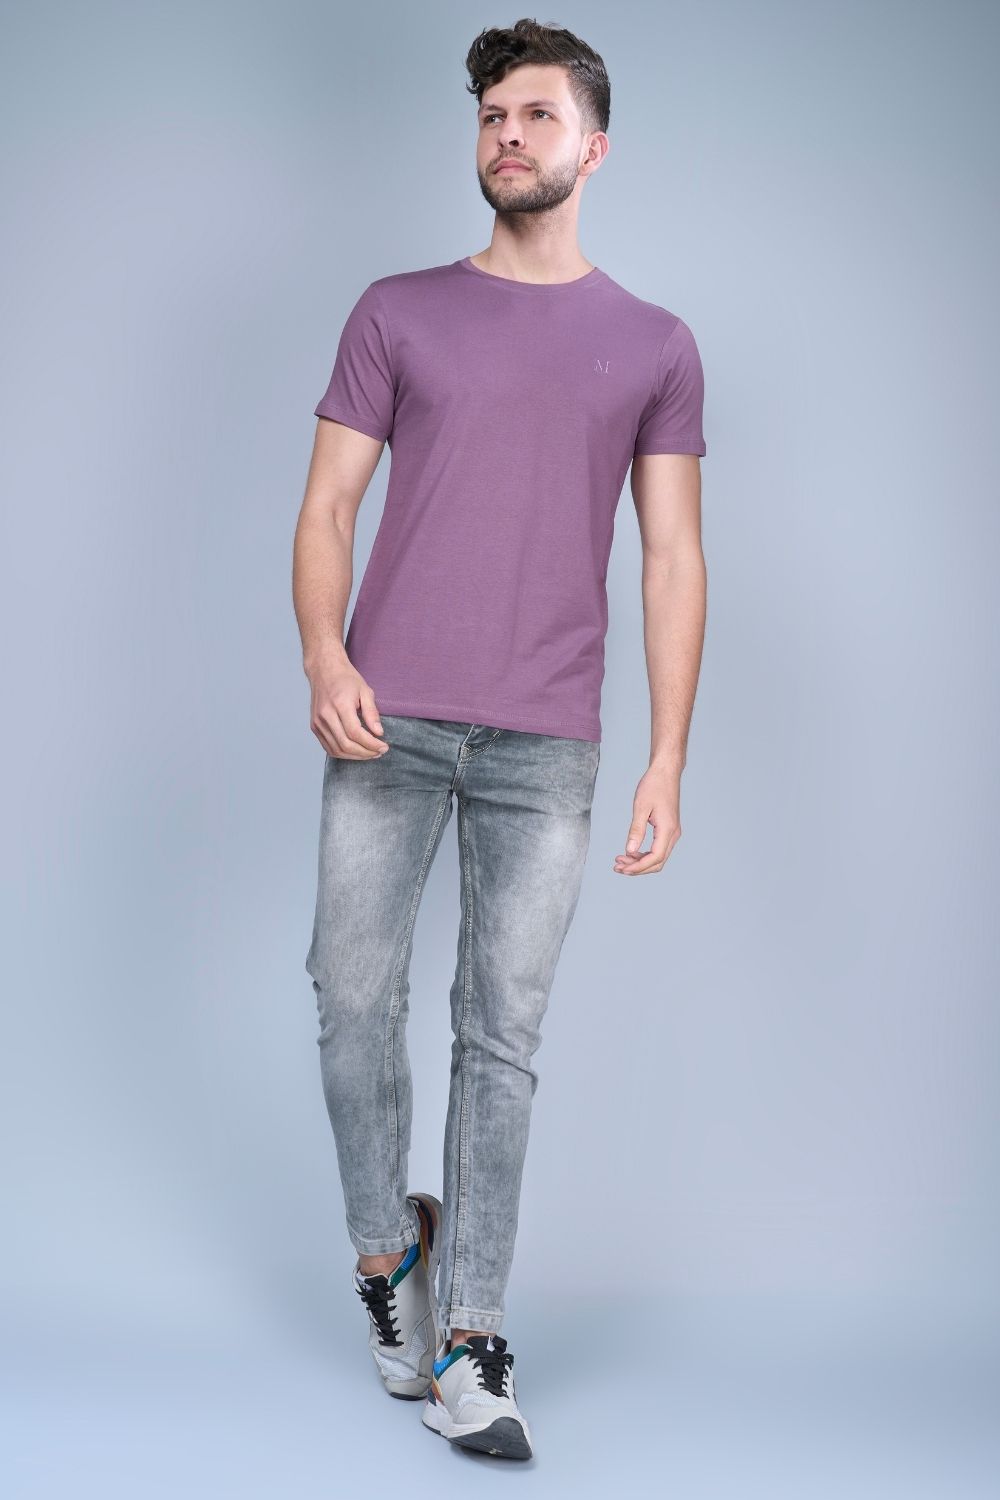 Light maroon colored, Solid T shirt for men, with half sleeves and round neck, full view.